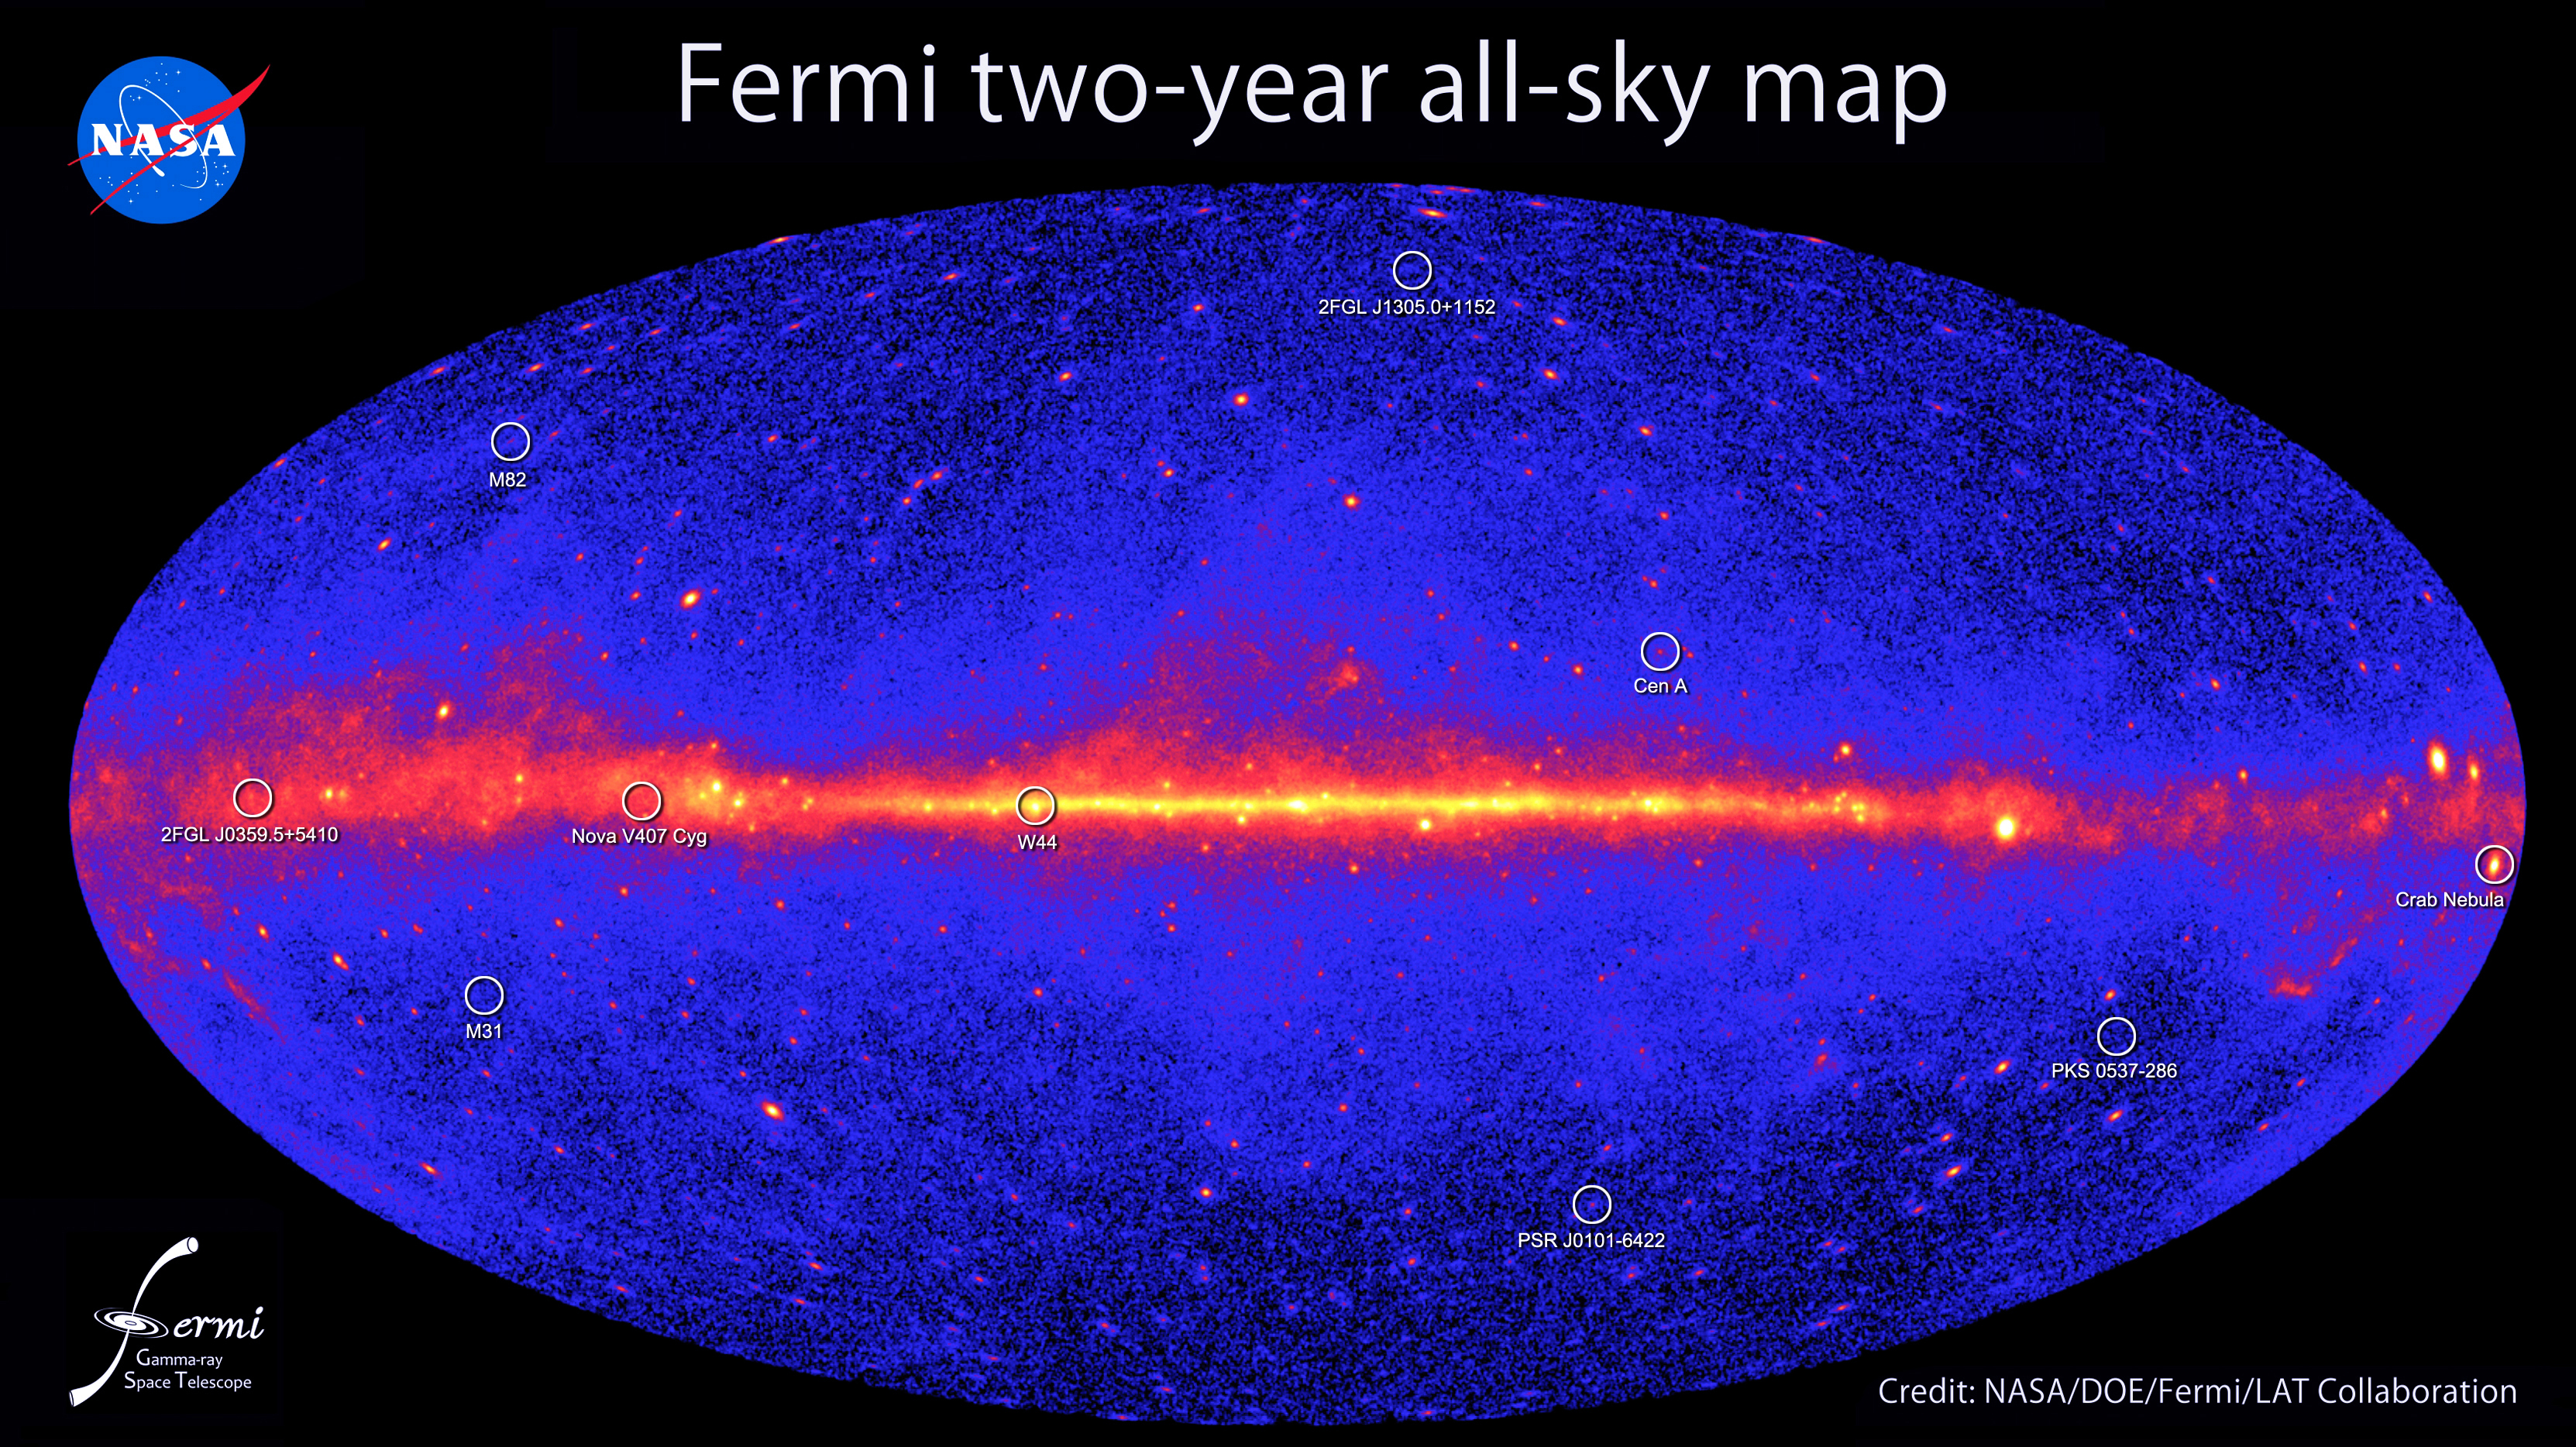 This all-sky image, constructed from two years of observations by NASA's Fermi Gamma-ray Space Telescope, shows how the sky appears at energies greater than 1 billion electron volts (1 GeV). Brighter colors indicate brighter gamma-ray sources. For comparison, the energy of visible light is between 2 and 3 electron volts. A diffuse glow fills the sky and is brightest along the plane of our galaxy (middle). Discrete gamma-ray sources include pulsars and supernova remnants within our galaxy as well as distant galaxies powered by supermassive black holes. Credit: NASA/DOE/Fermi LAT Collaboration